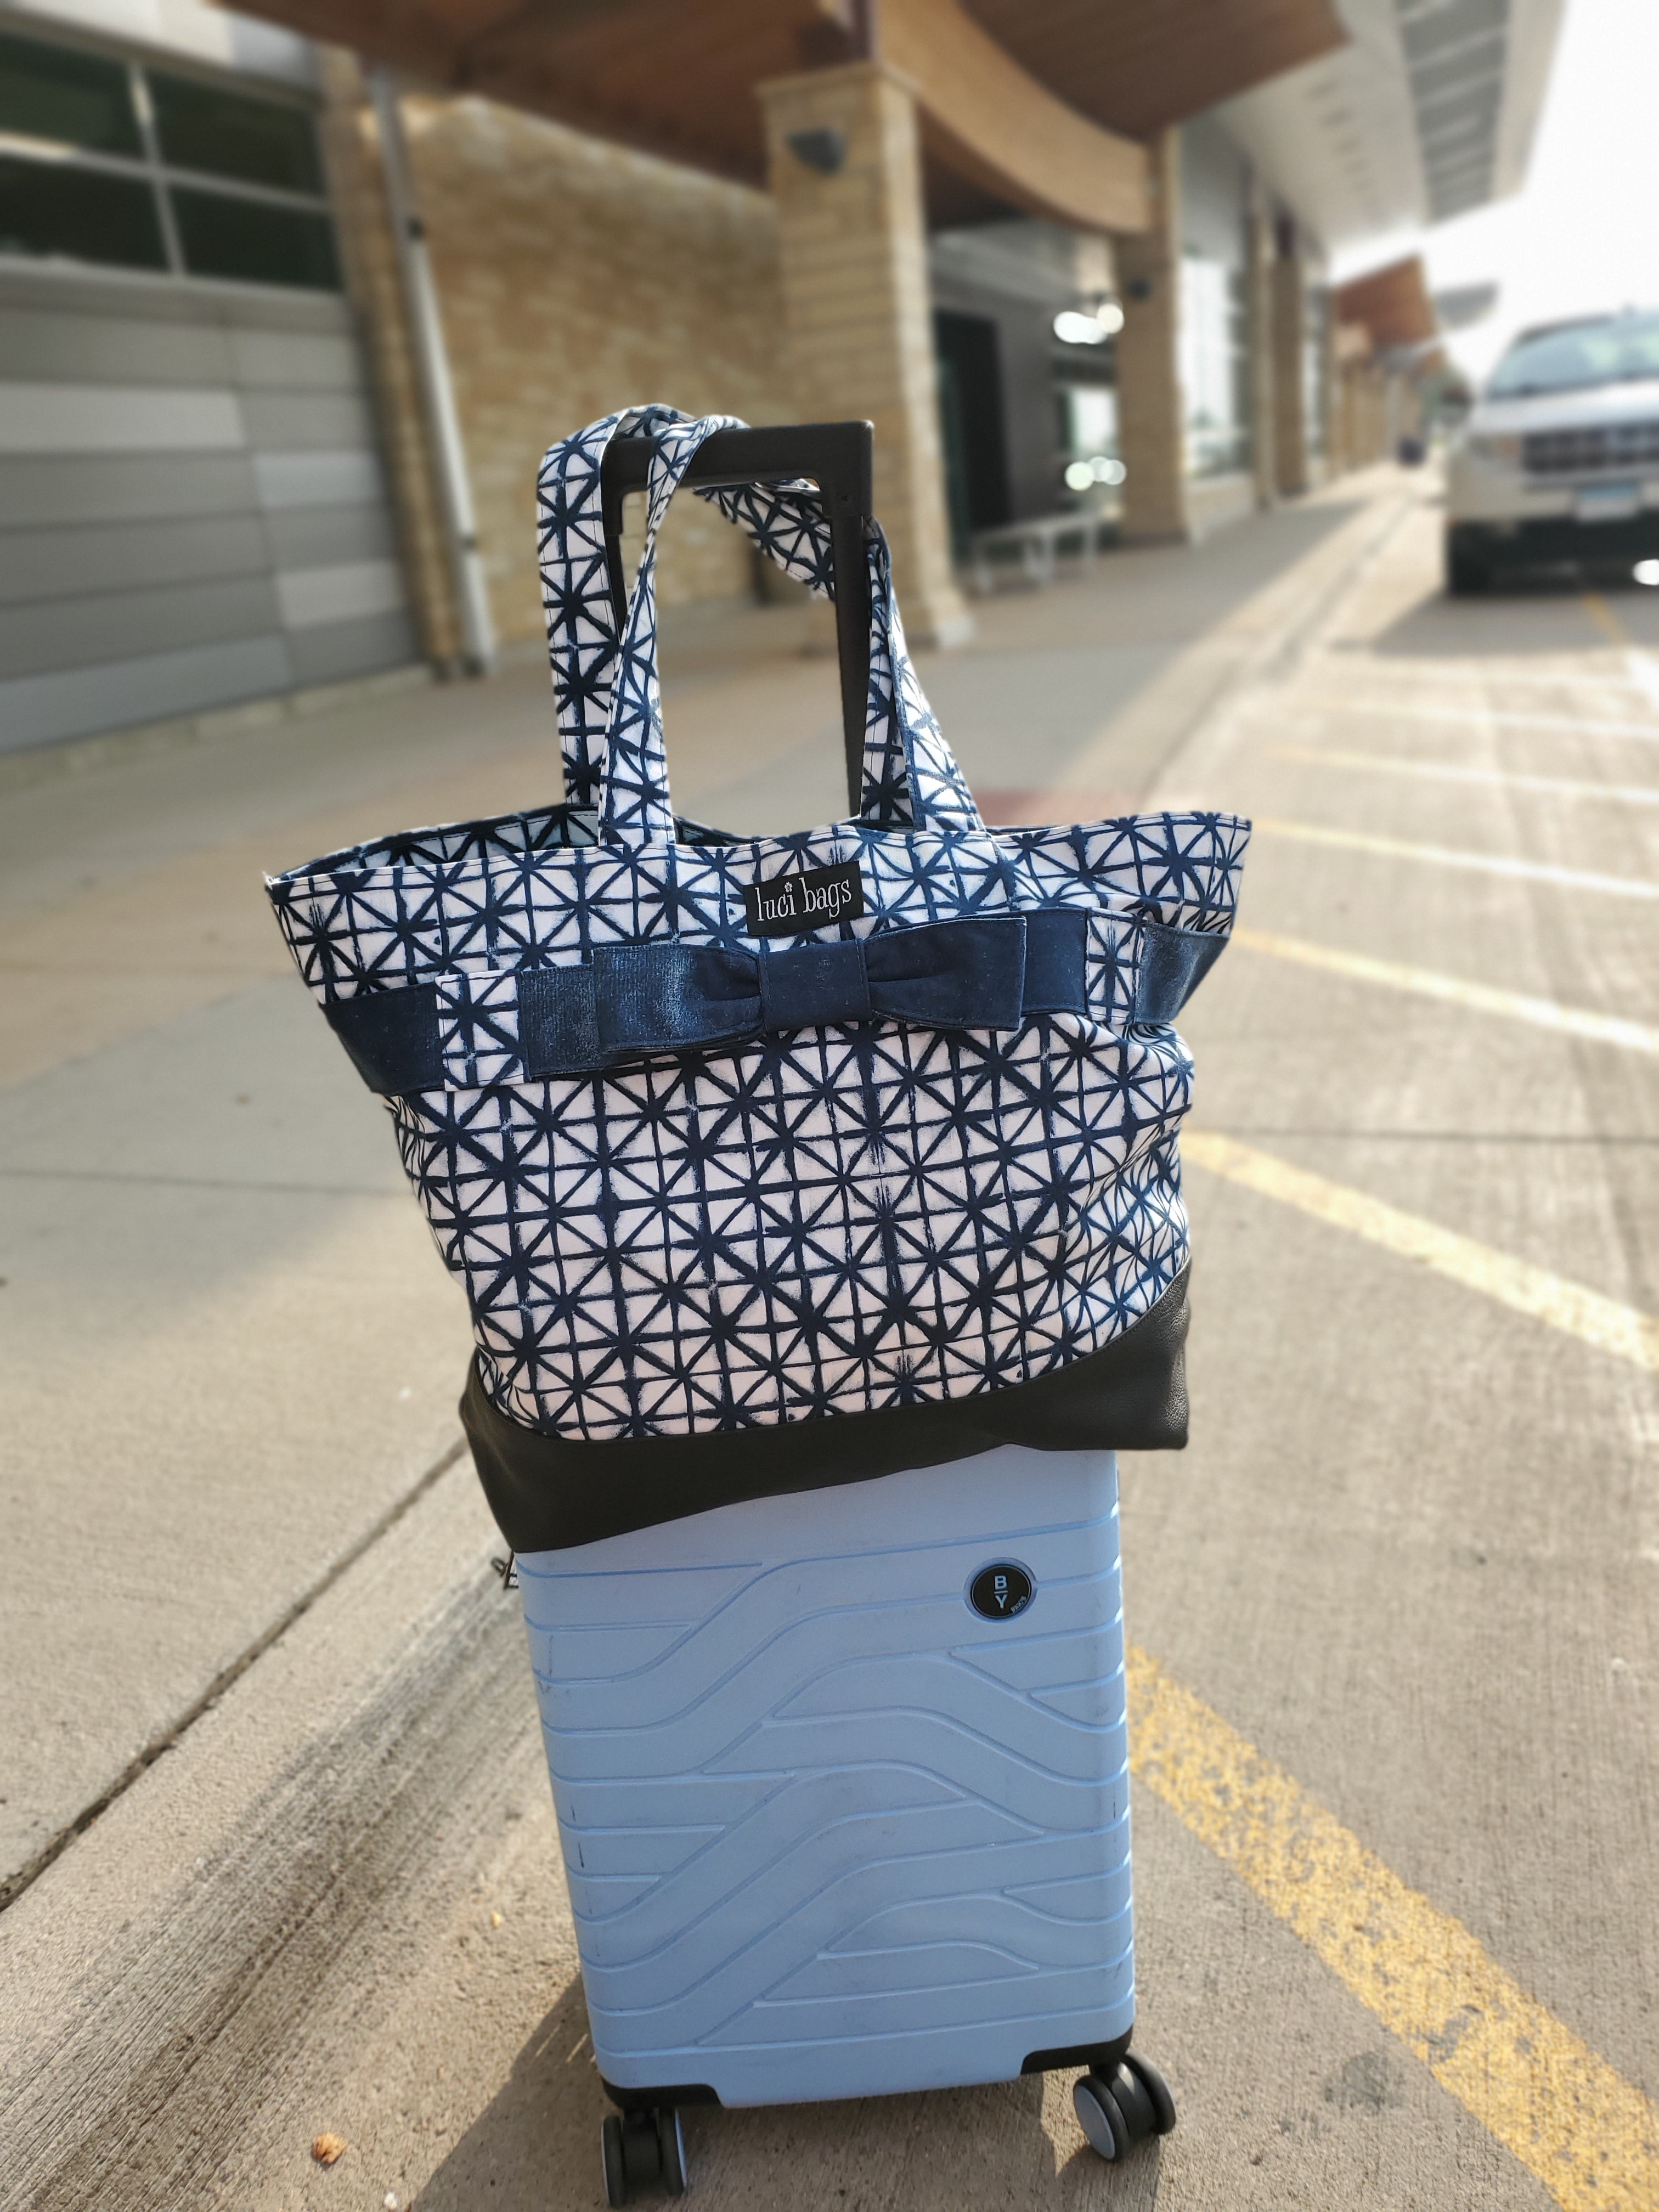 Large blue and white shibori tote sitting on top of suitcase at the airport.